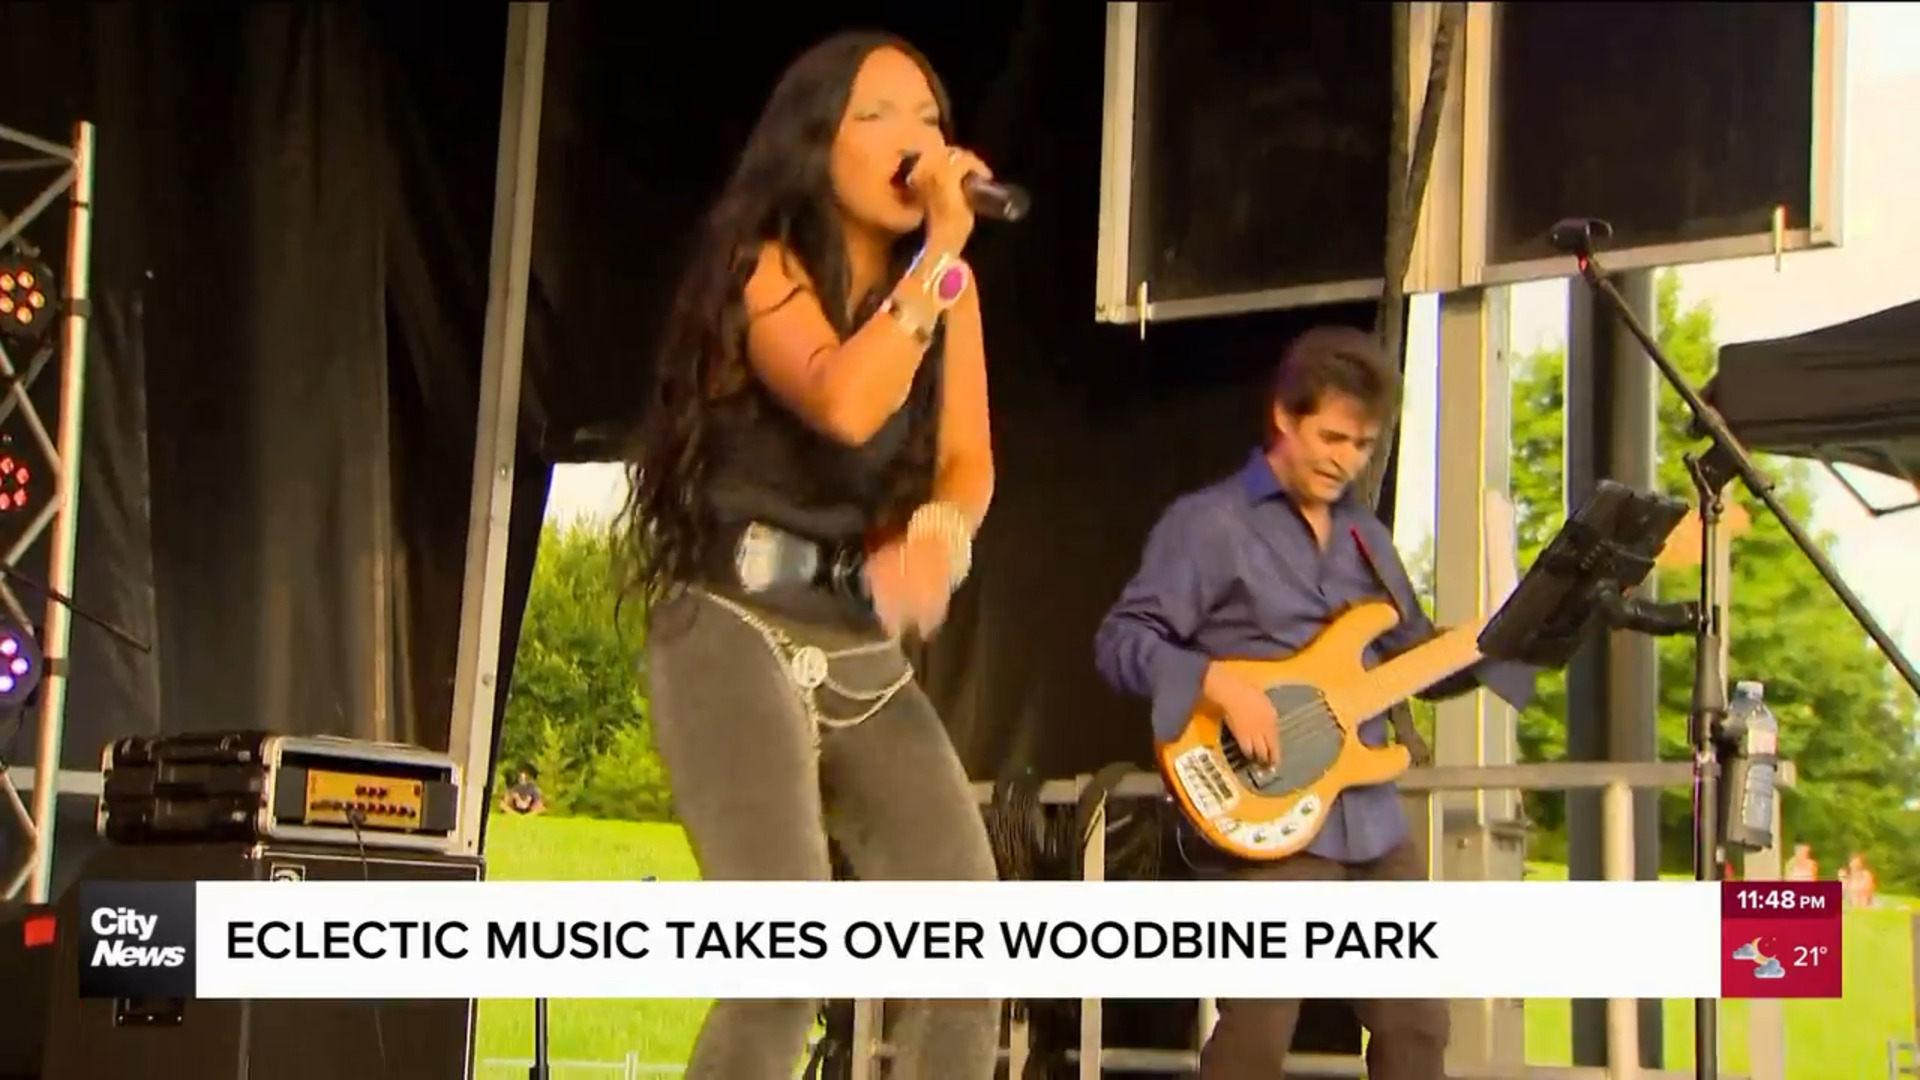 Eclectic music takes over Woodbine Park